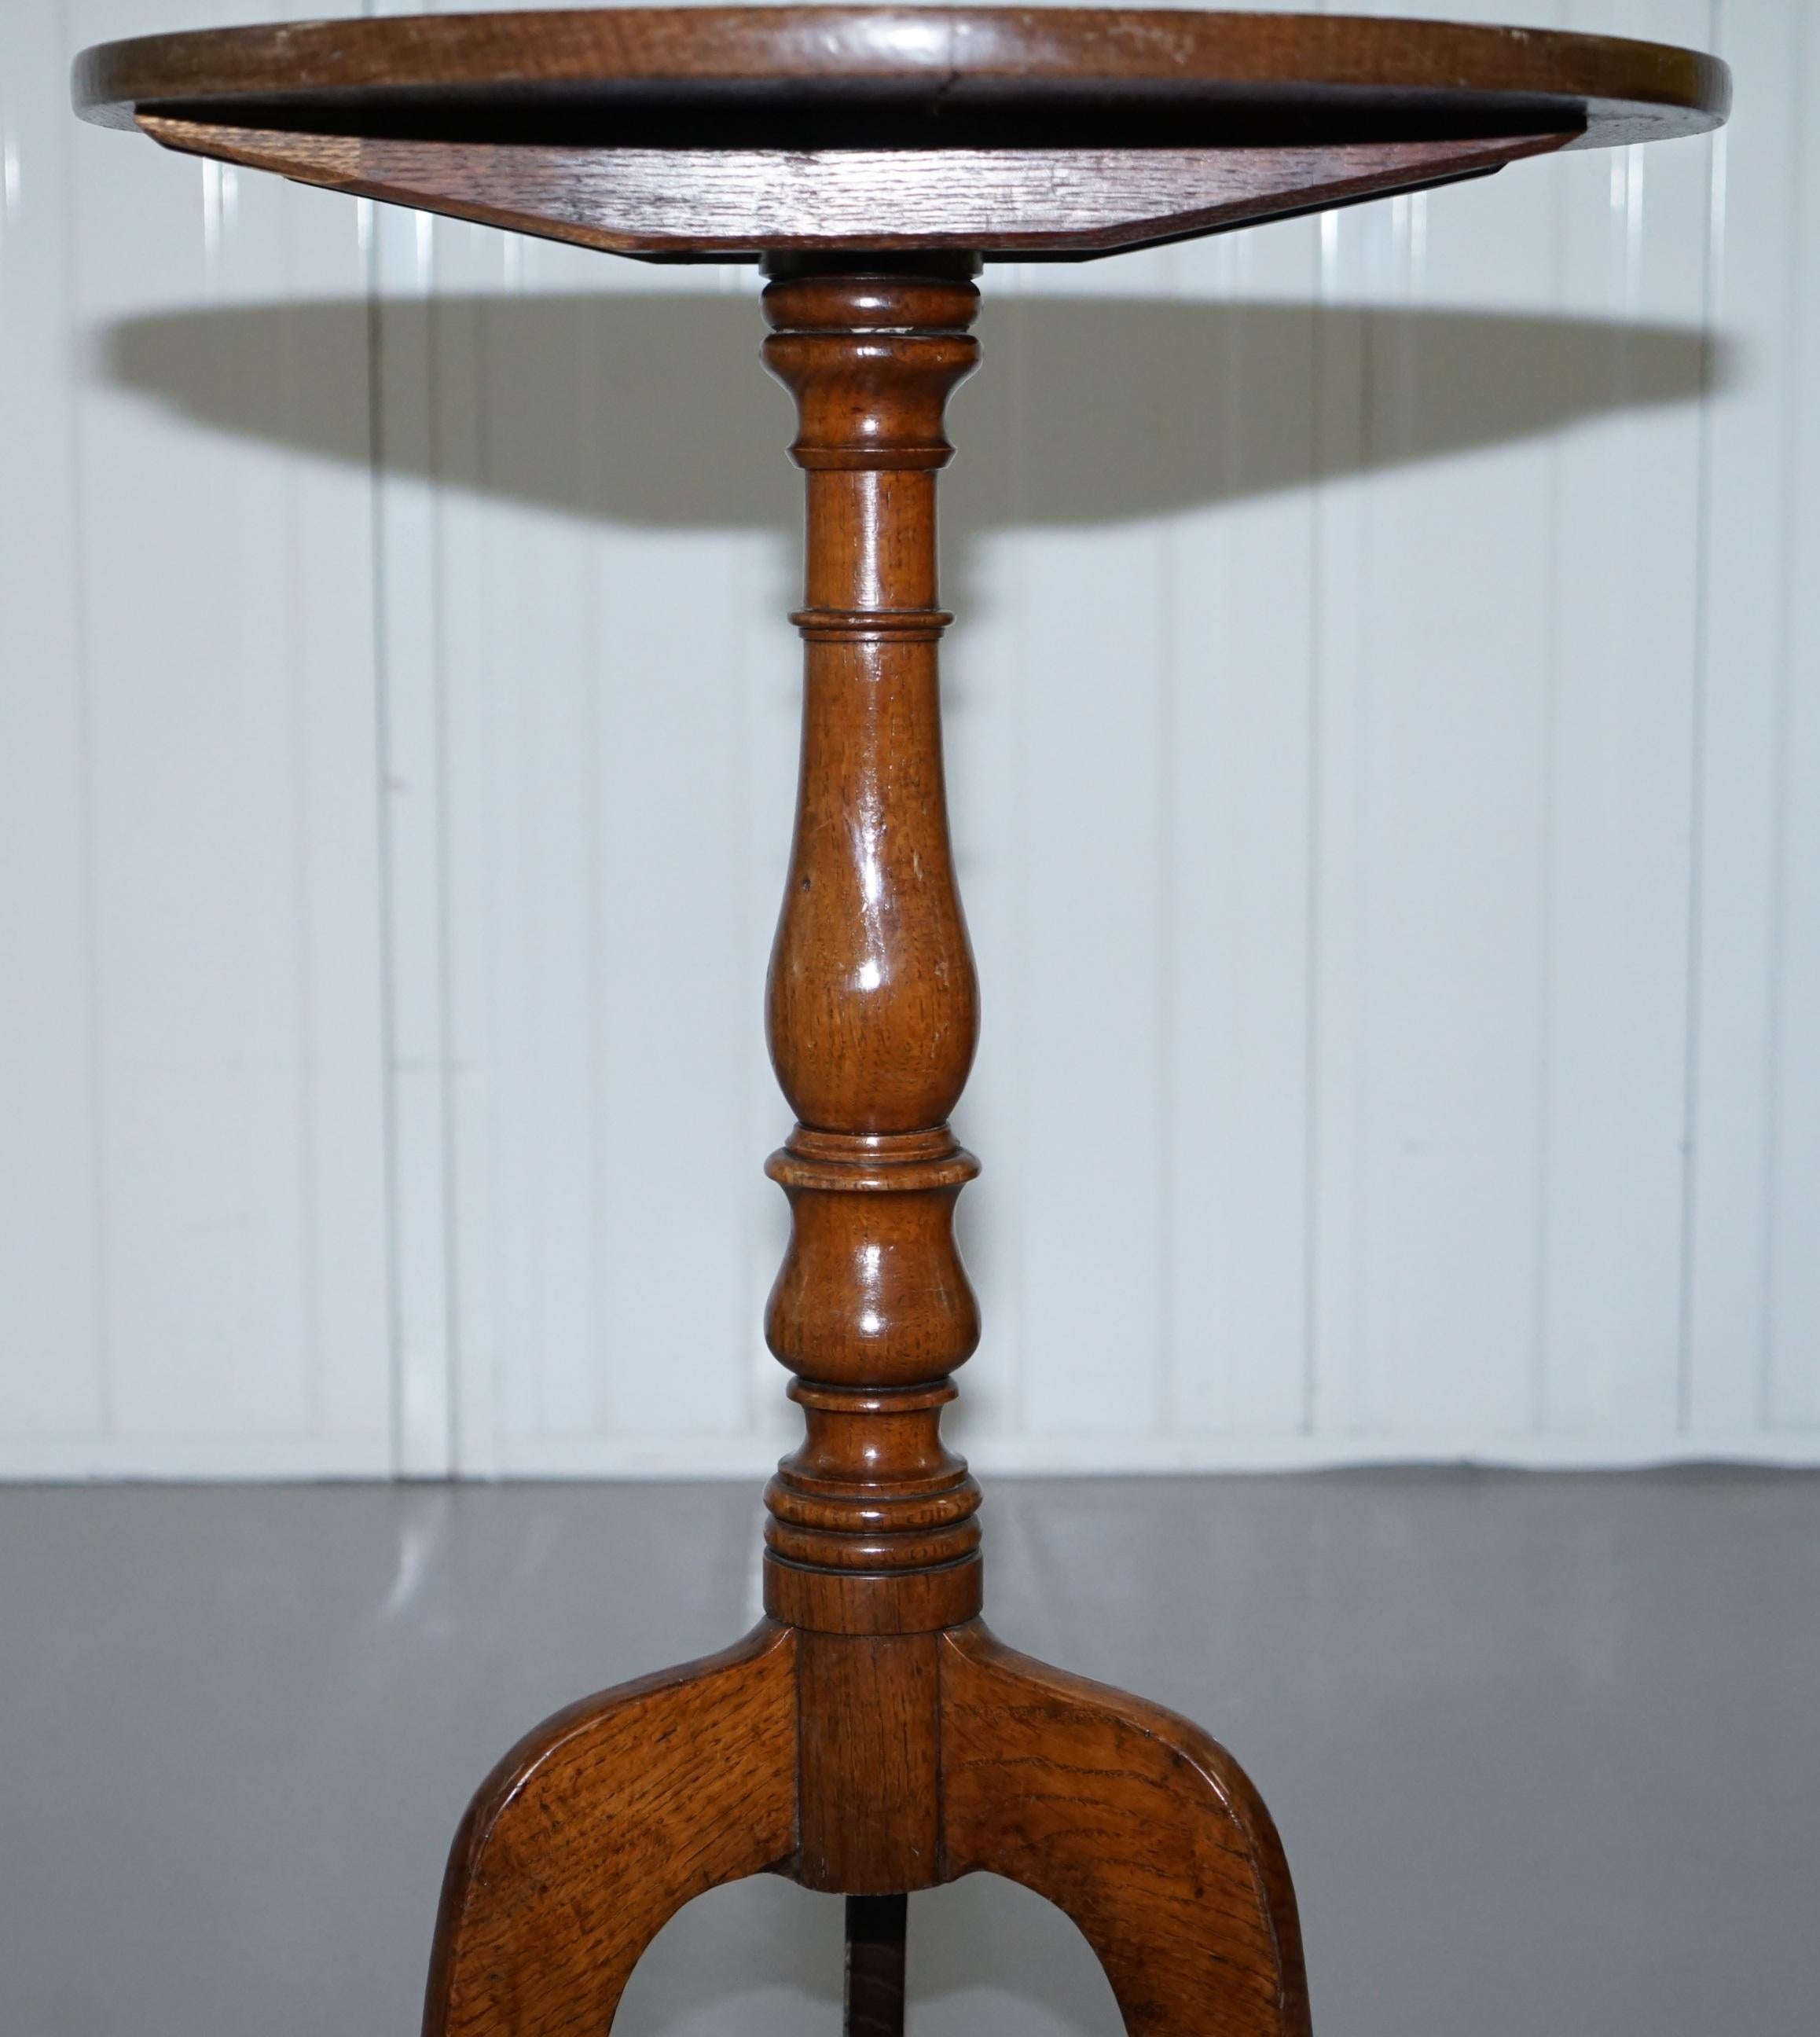 Hand-Crafted Edwardian Oak Round Tripod Lamp Wine Side Table Lovely Size and Form Versatile